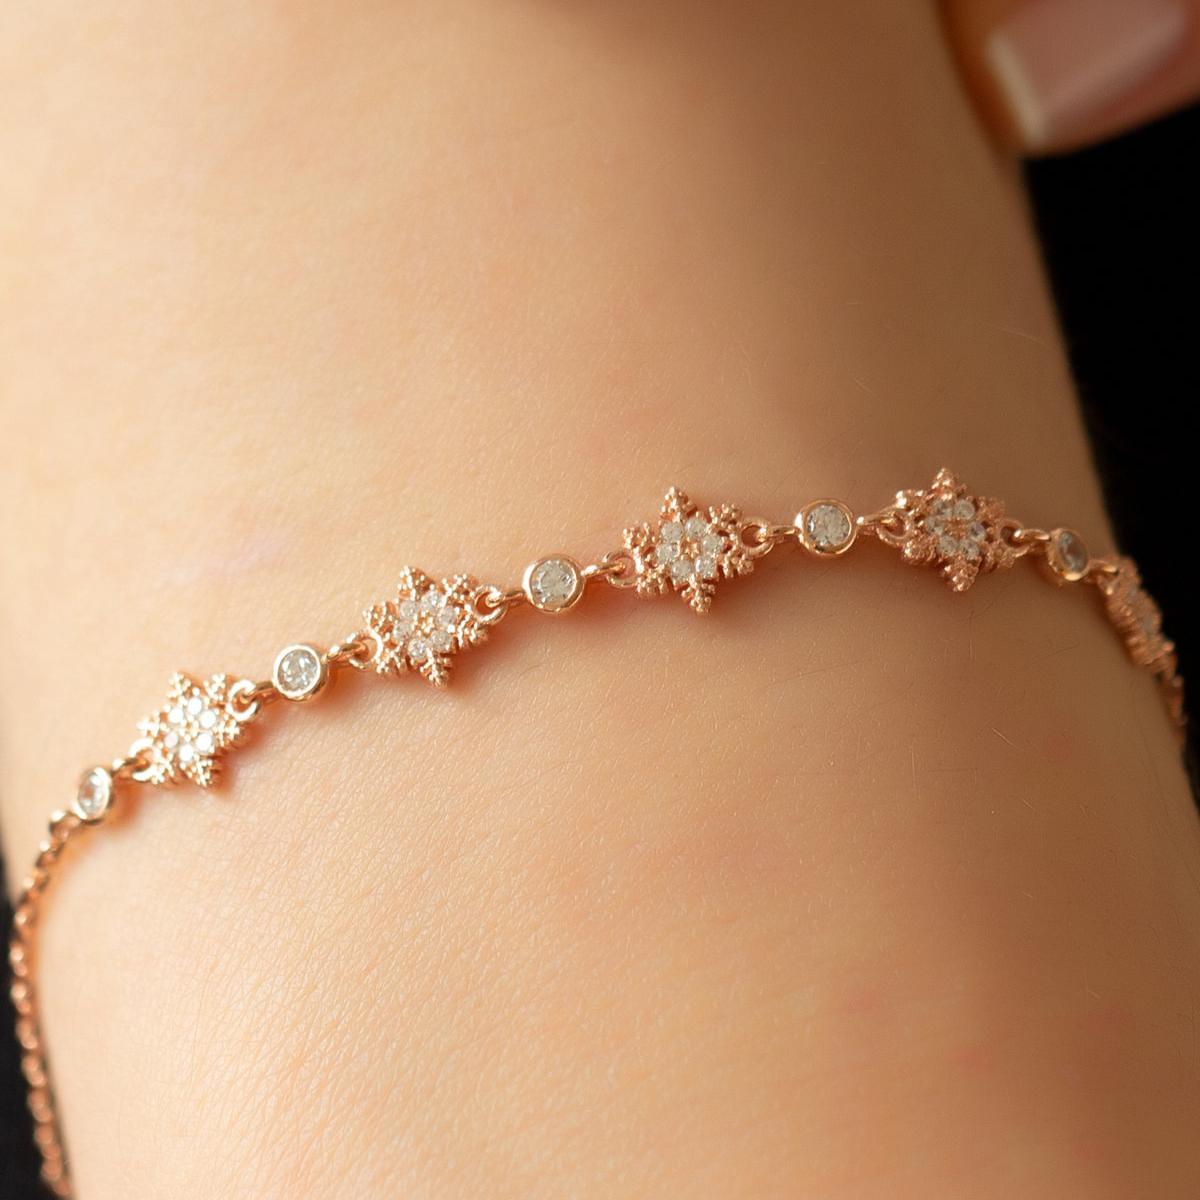 Snowflakes Bracelet • Bridesmaid Gifts For Wedding Day - Trending Silver Gifts